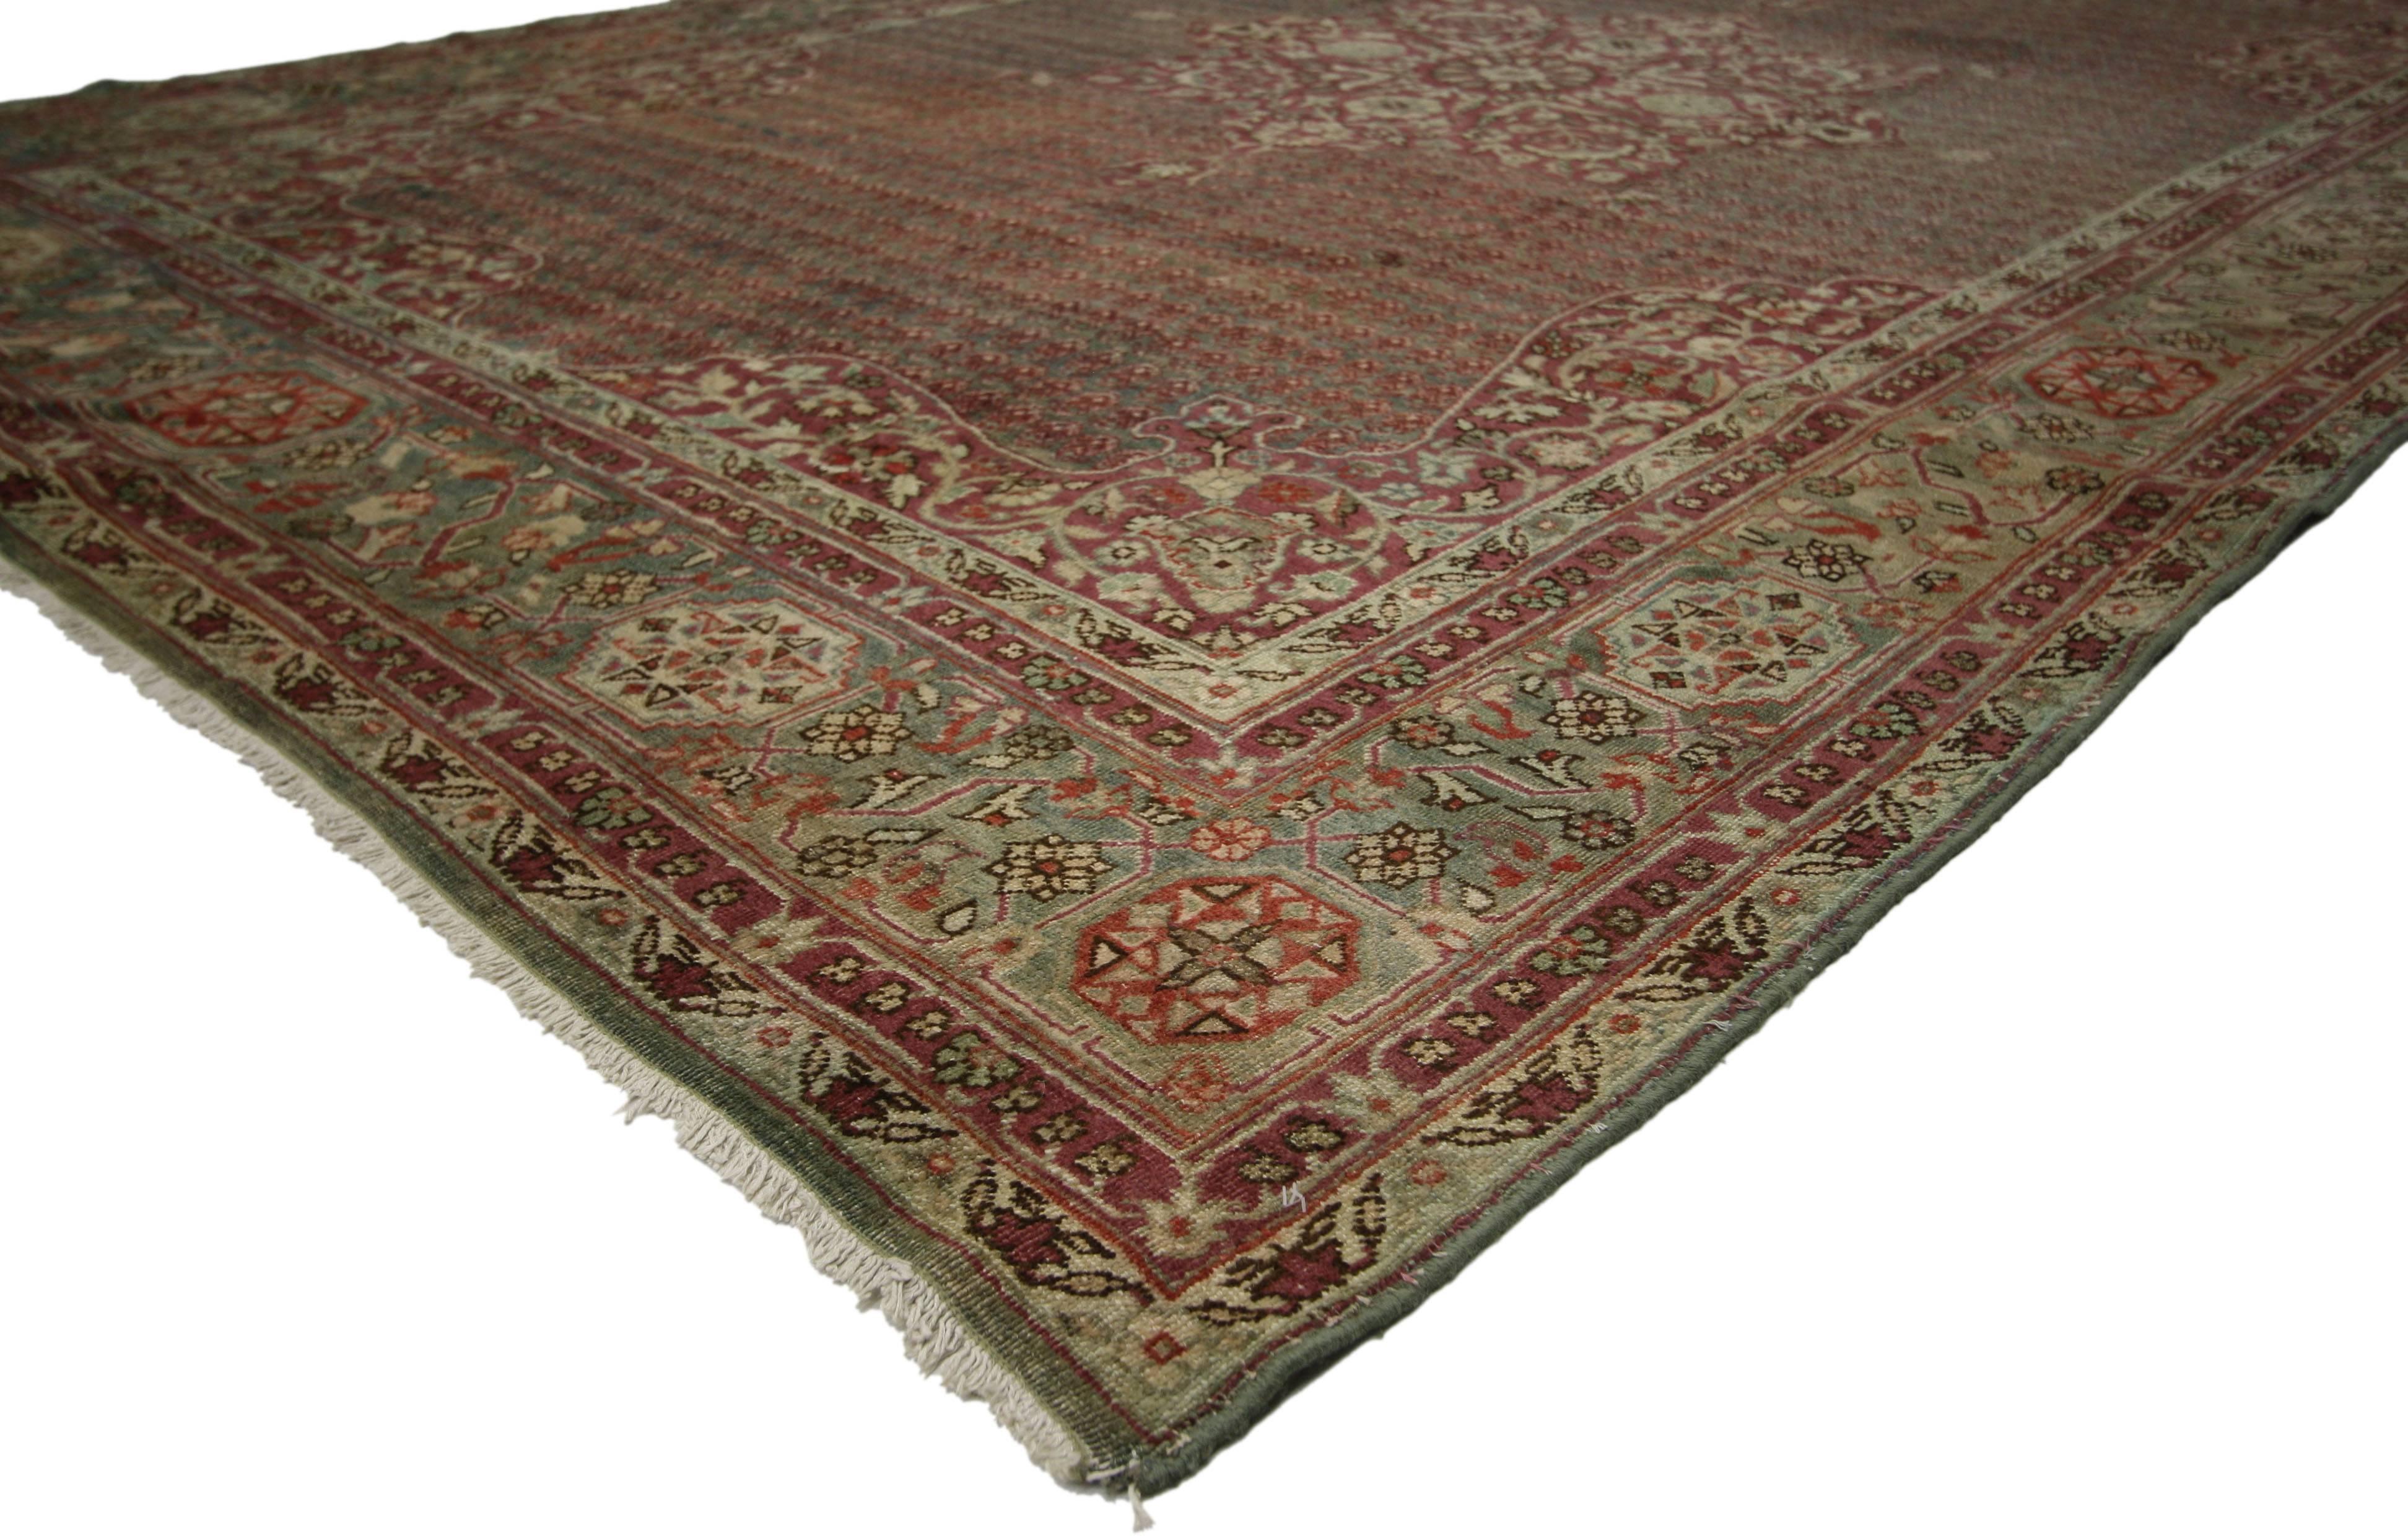 71466 Distressed Antique Indian Agra Rug with Rustic Jacobean Old World Style 07'03 x 10'10. Ravishing and refined with beguiling ambiance, this hand-knotted wool distressed antique Agra rug showcases an ornate eight-point cusped trefoil medallion